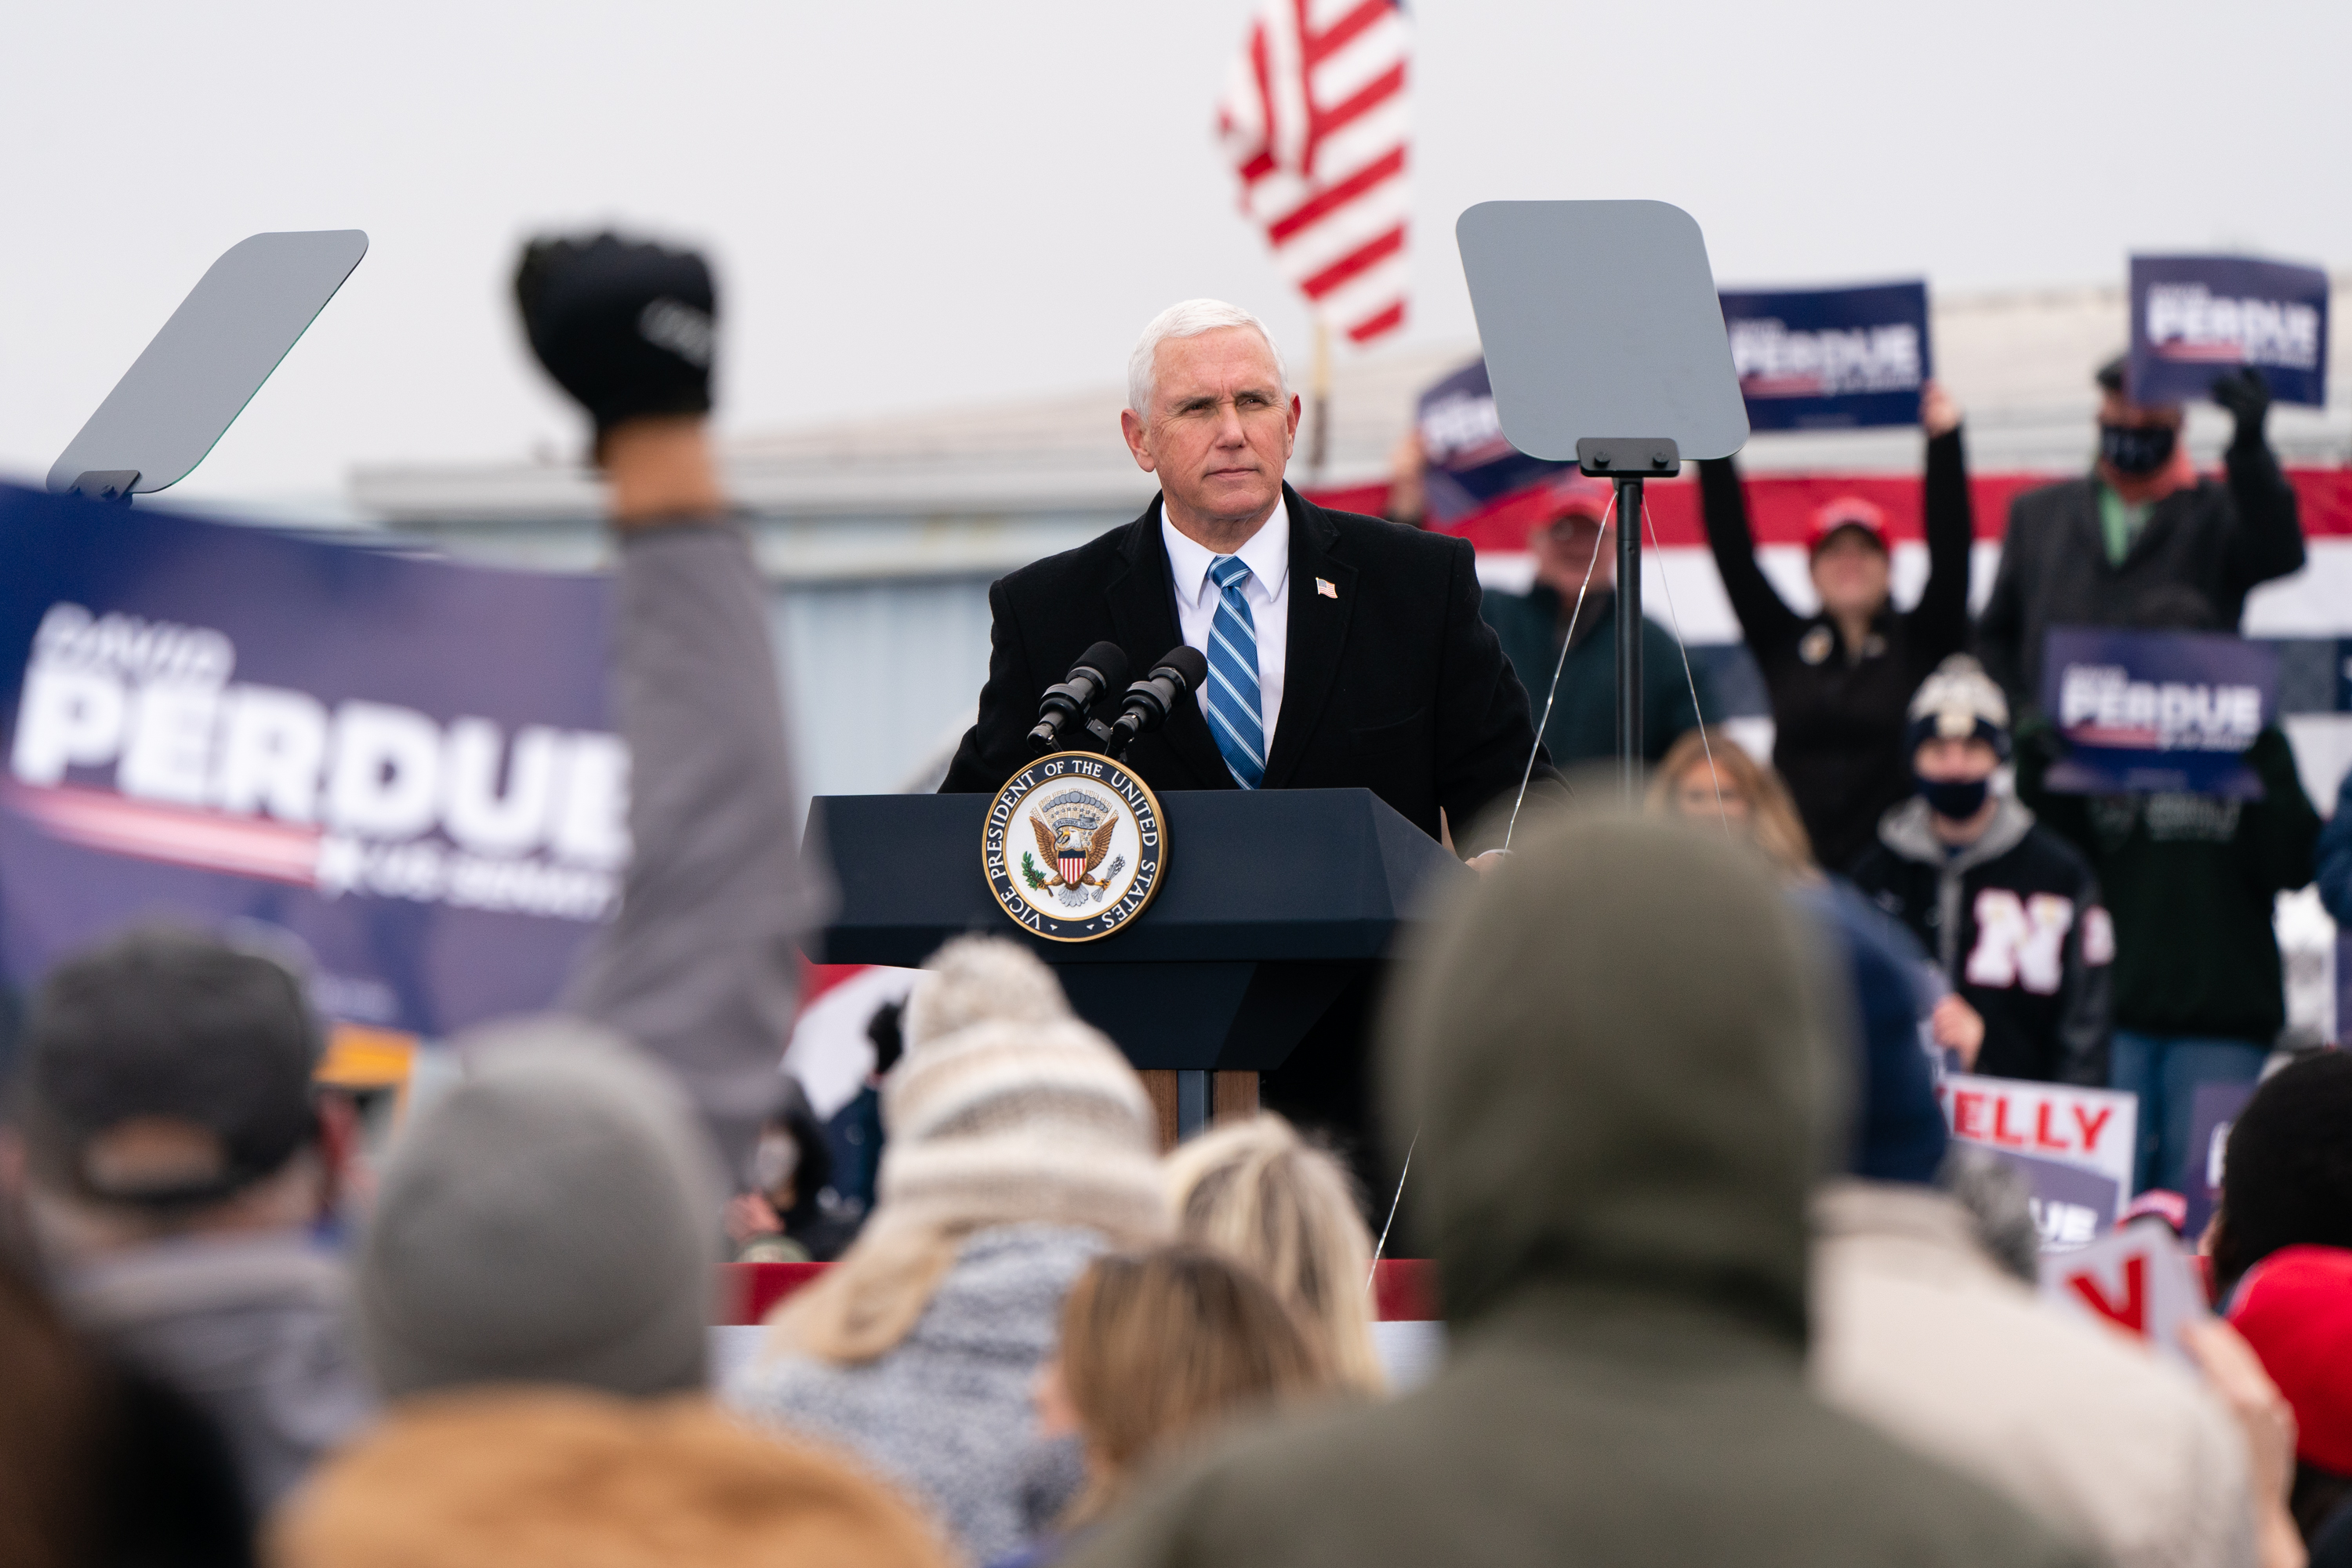 Give Mike Pence ‘exclusive authority’ that the electoral college votes to tell: process